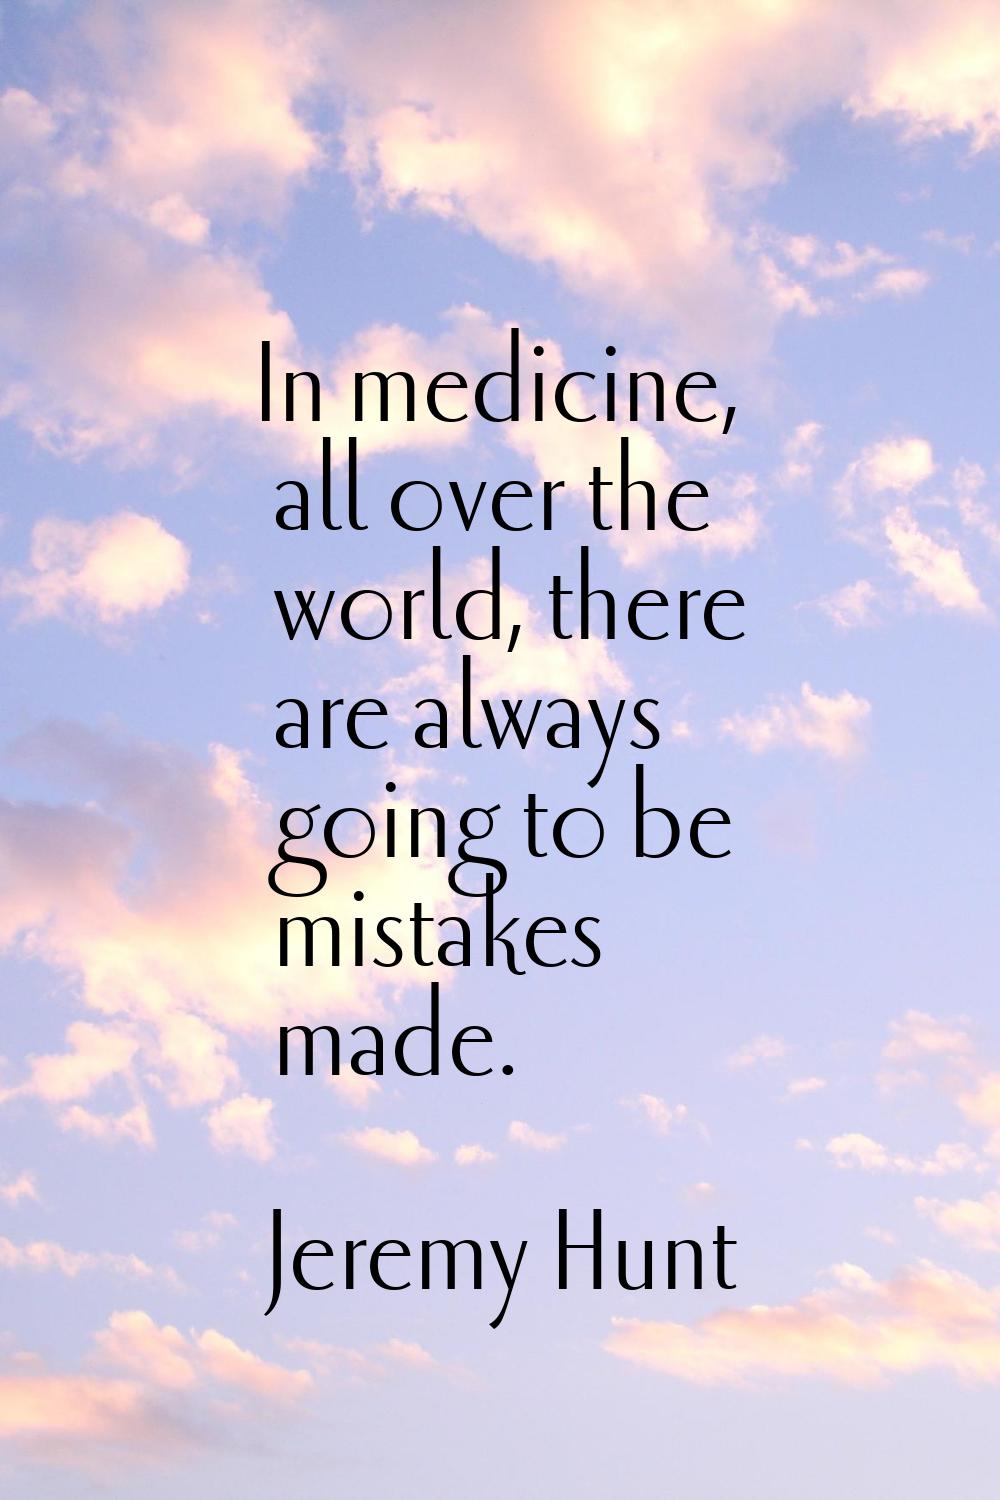 In medicine, all over the world, there are always going to be mistakes made.